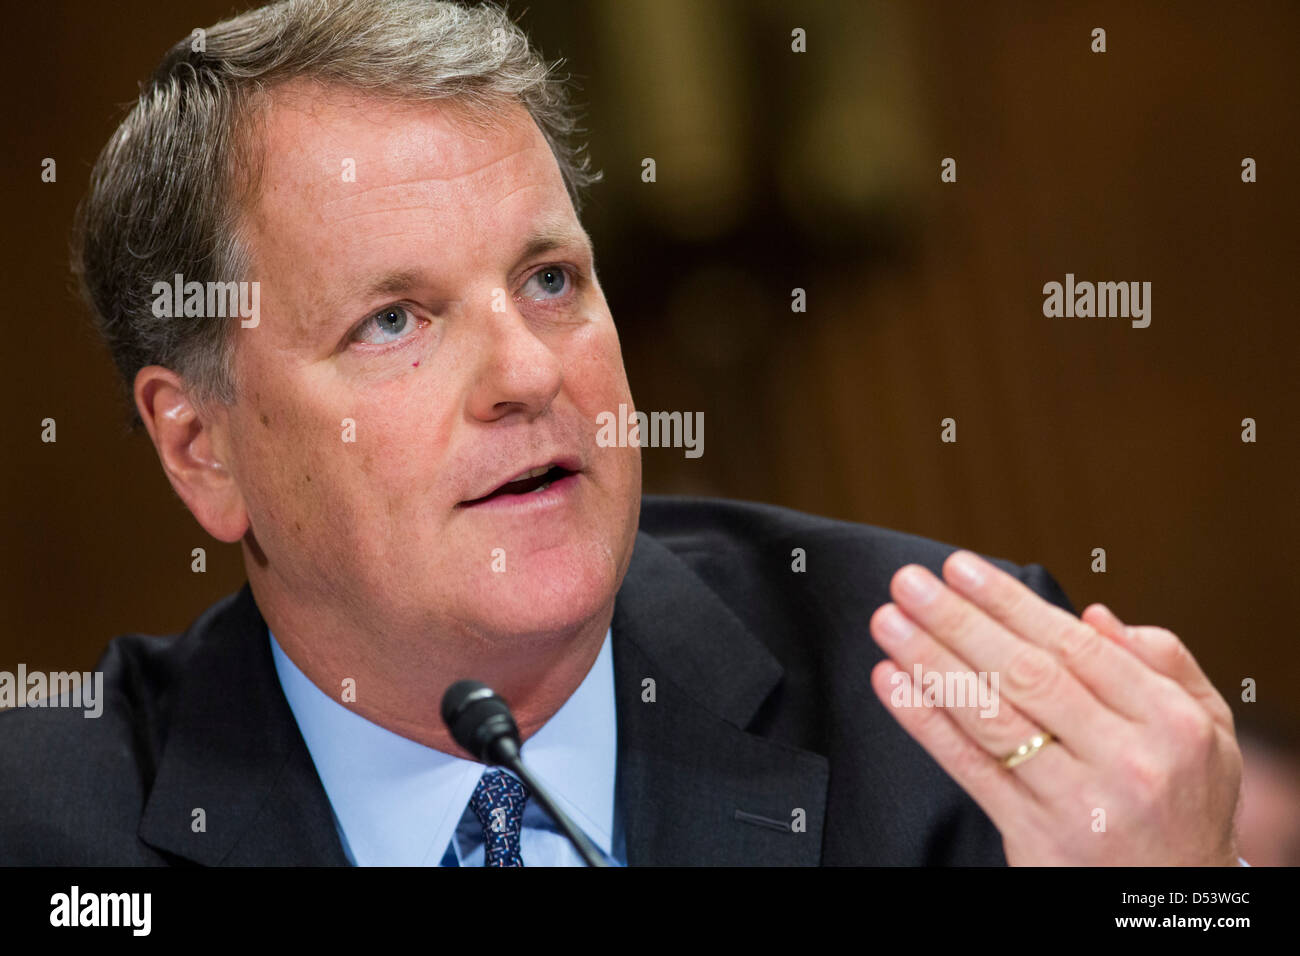 Douglas Parker, chairman and CEO of the US Airways Group.  Stock Photo